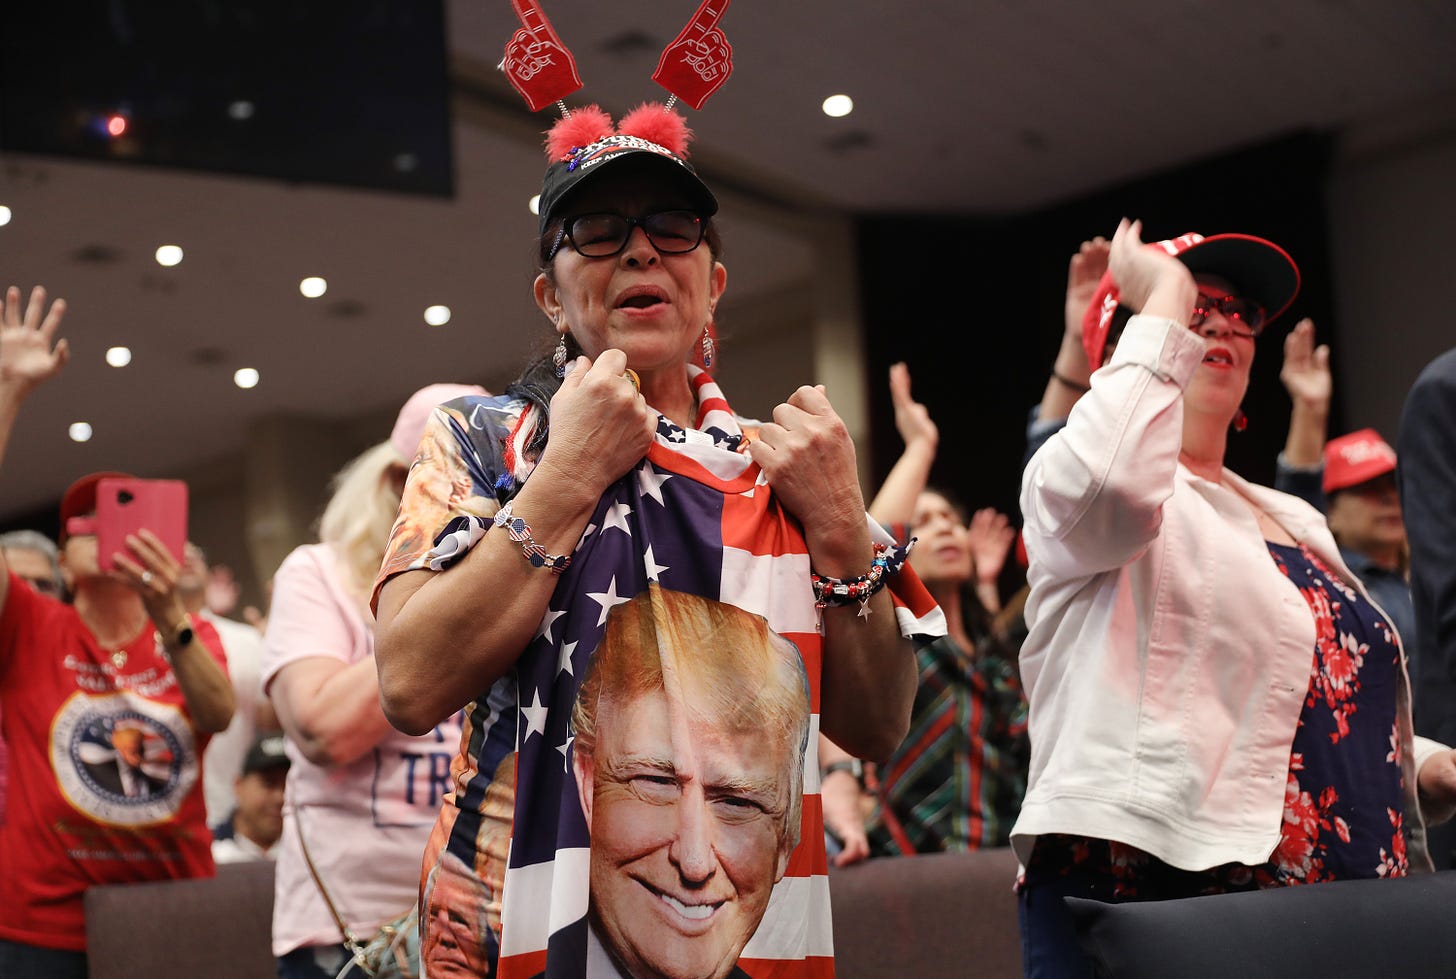 The Trump Campaign Launches “Evangelicals For Trump” Coalition In Miami, 2020. (Photo by Joe Raedle/Getty Images)